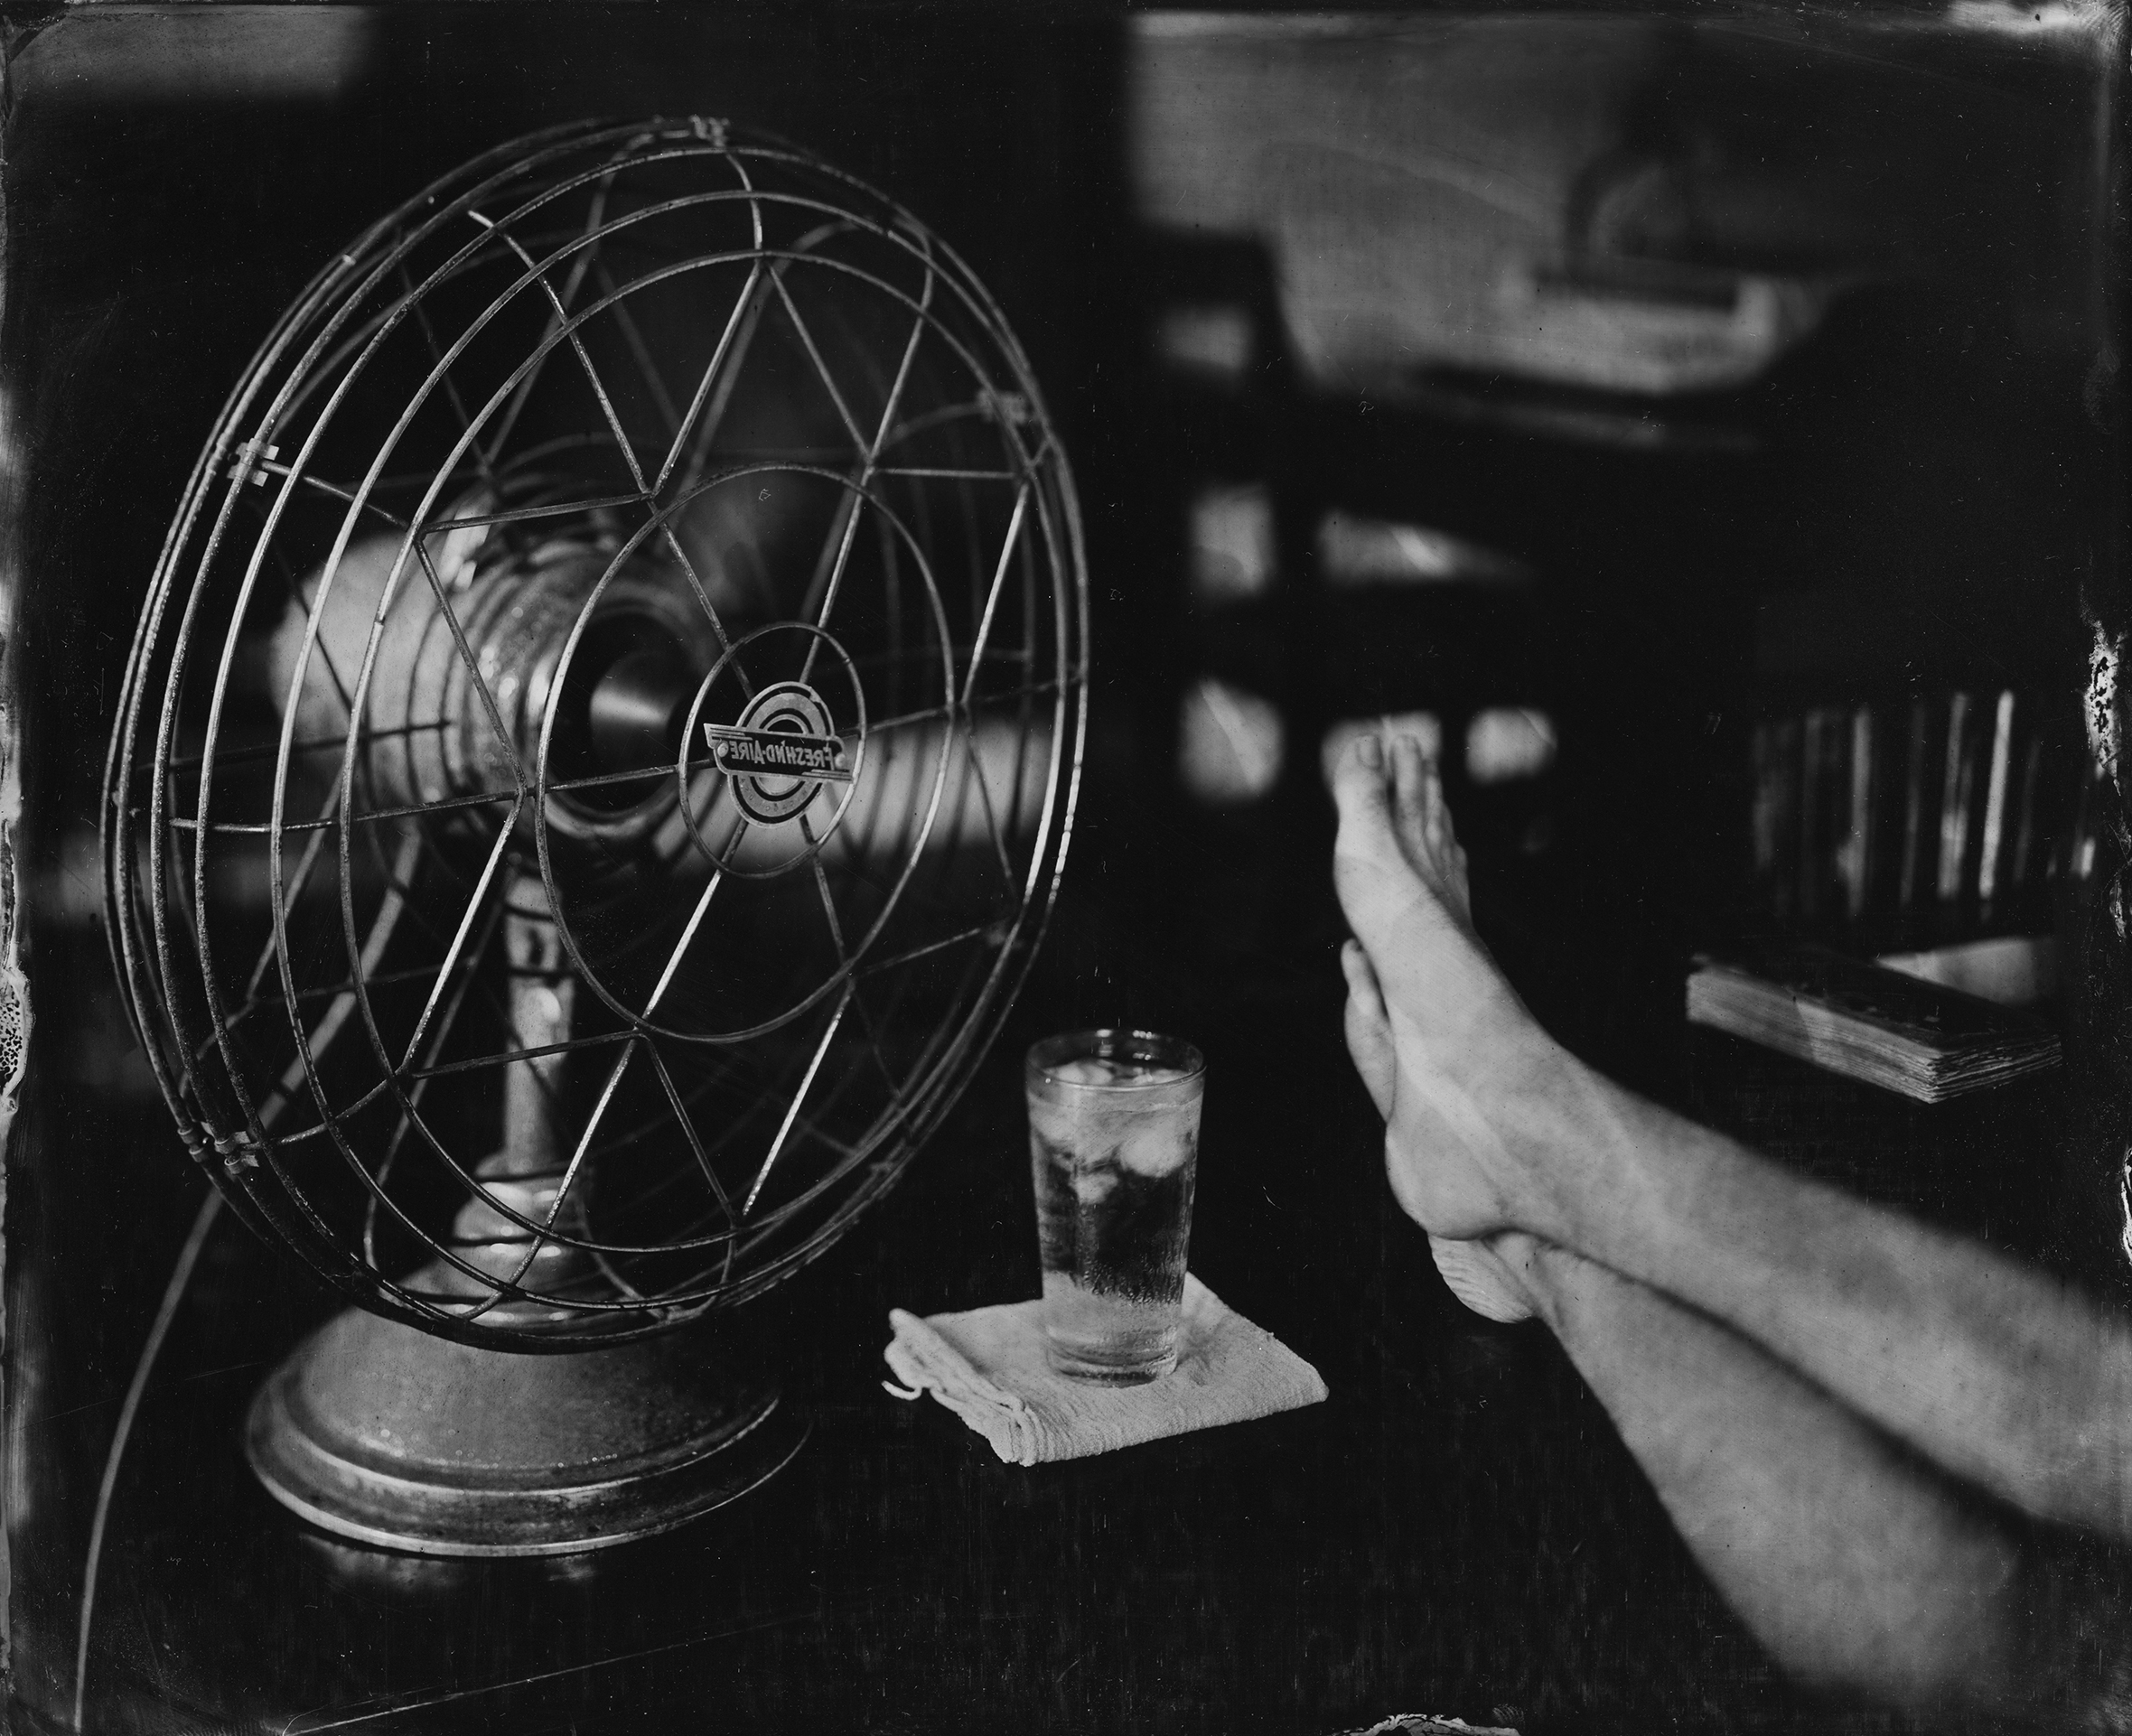 A desk with an iced beverage and an old-fashioned fan pointed at a seated man of whom is shown his bare shins and crossed feet.